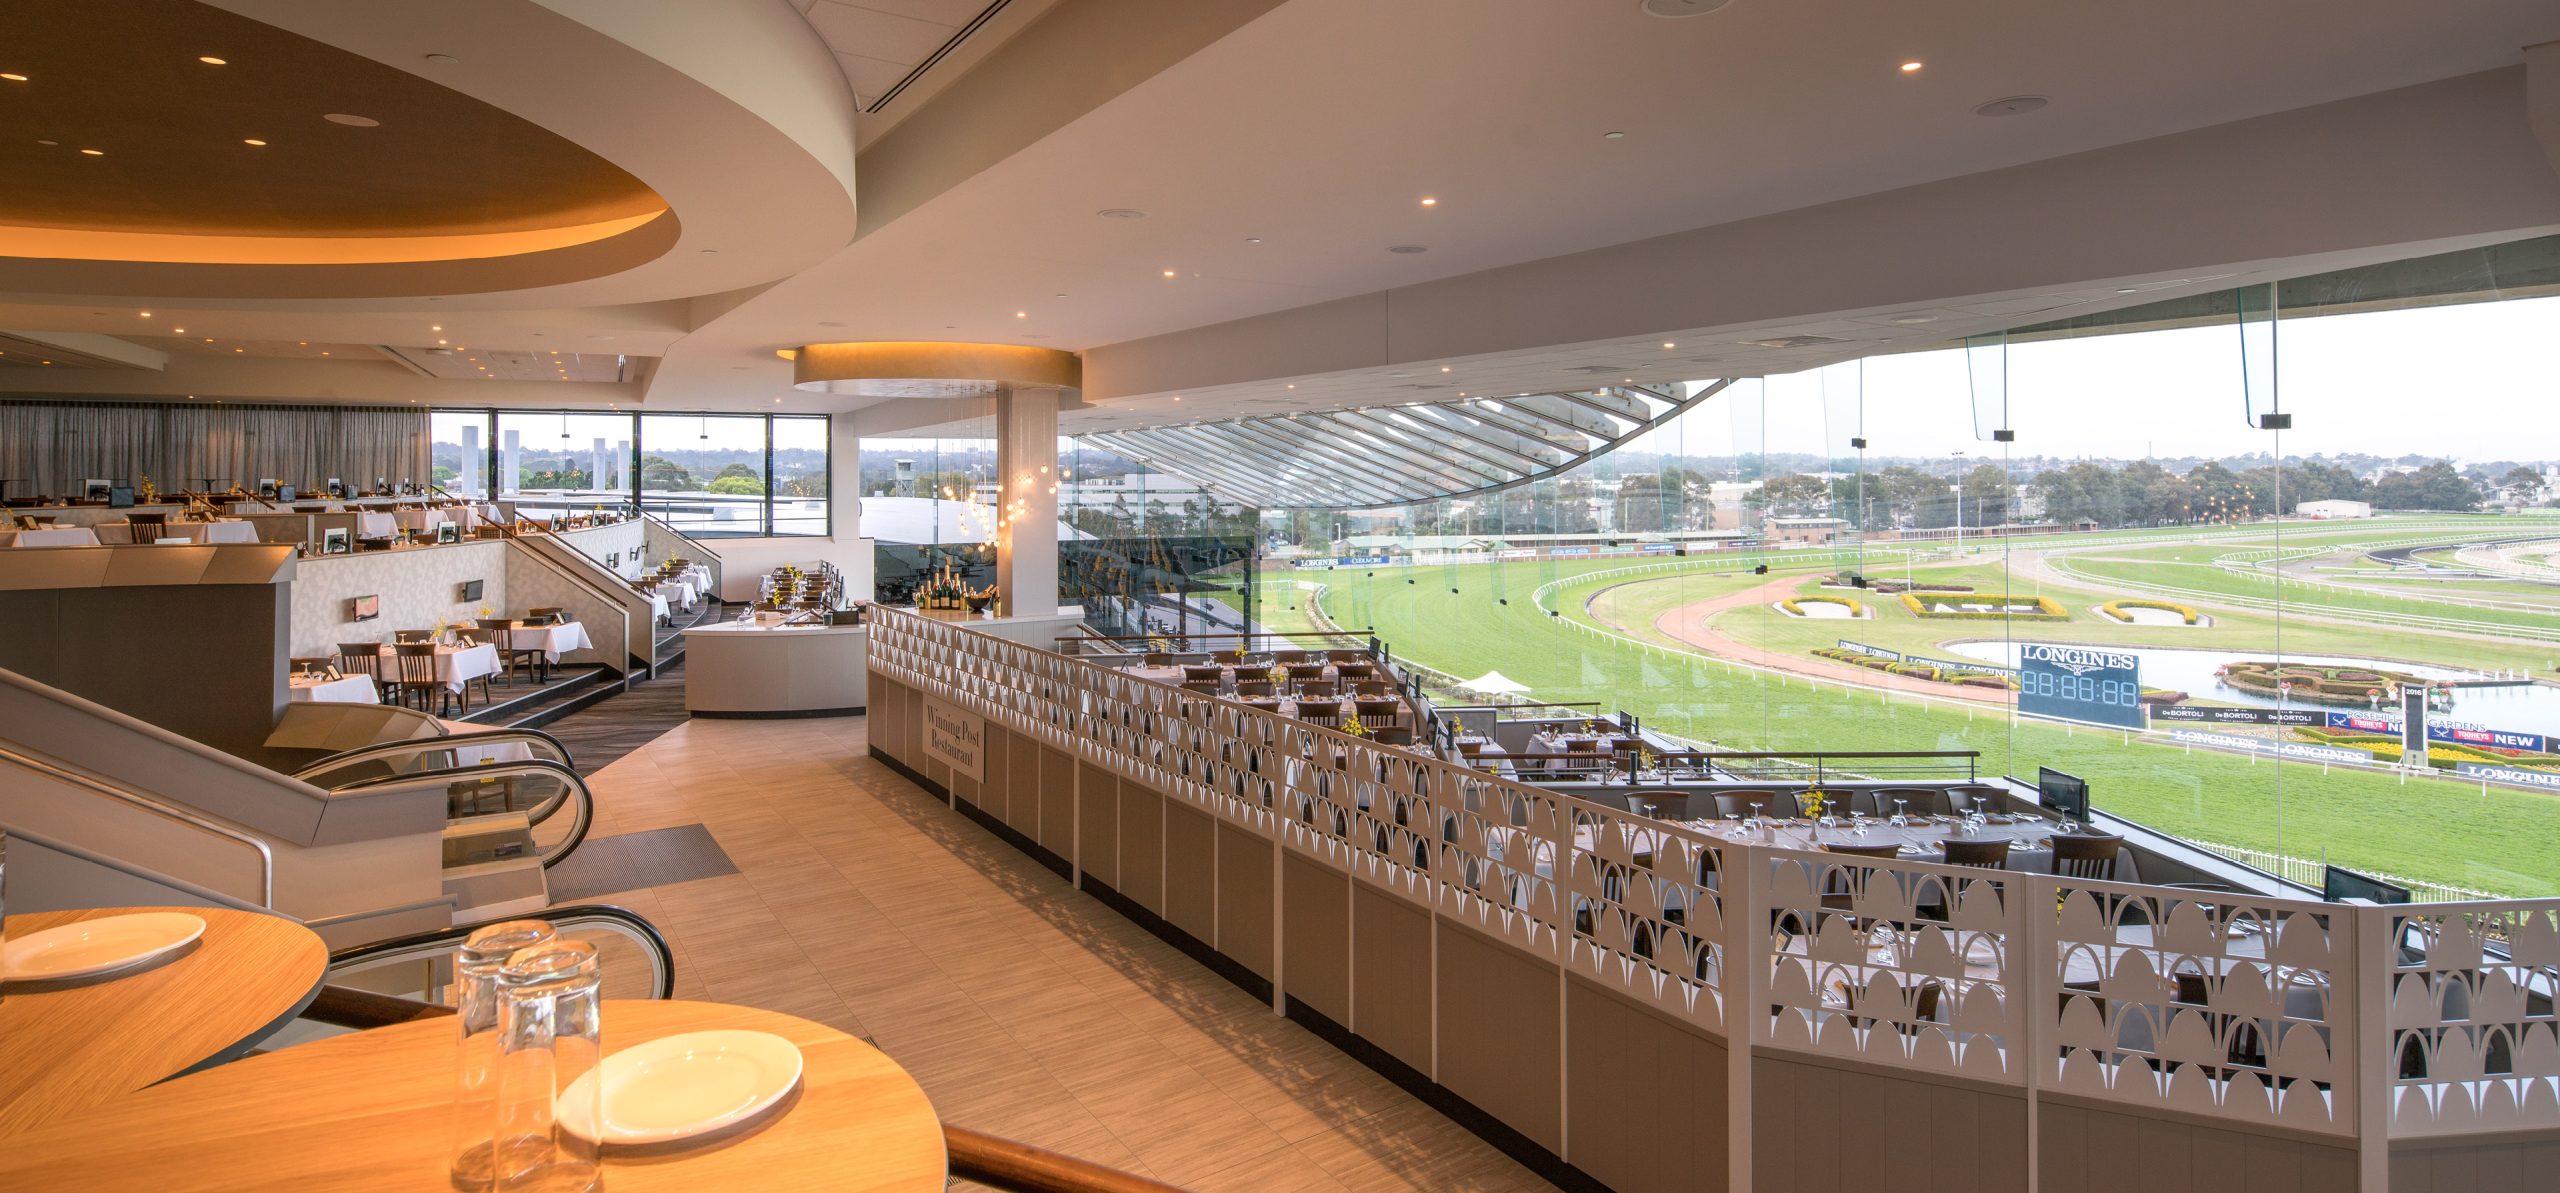 2 dining area track view rosehill racecourse refurbishment taylor construction hospitality community